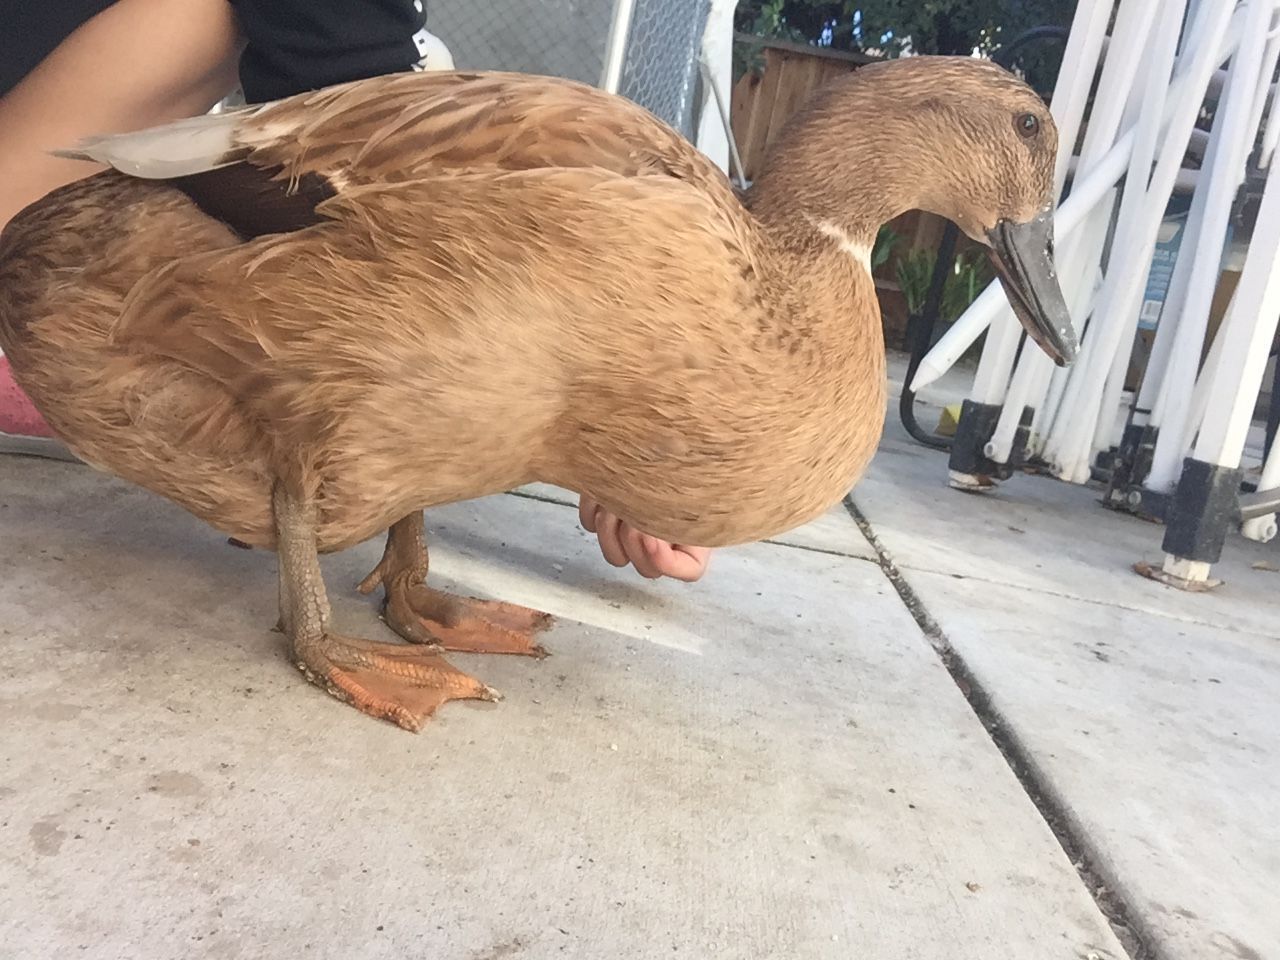 Duck has big chest. Is this normal?